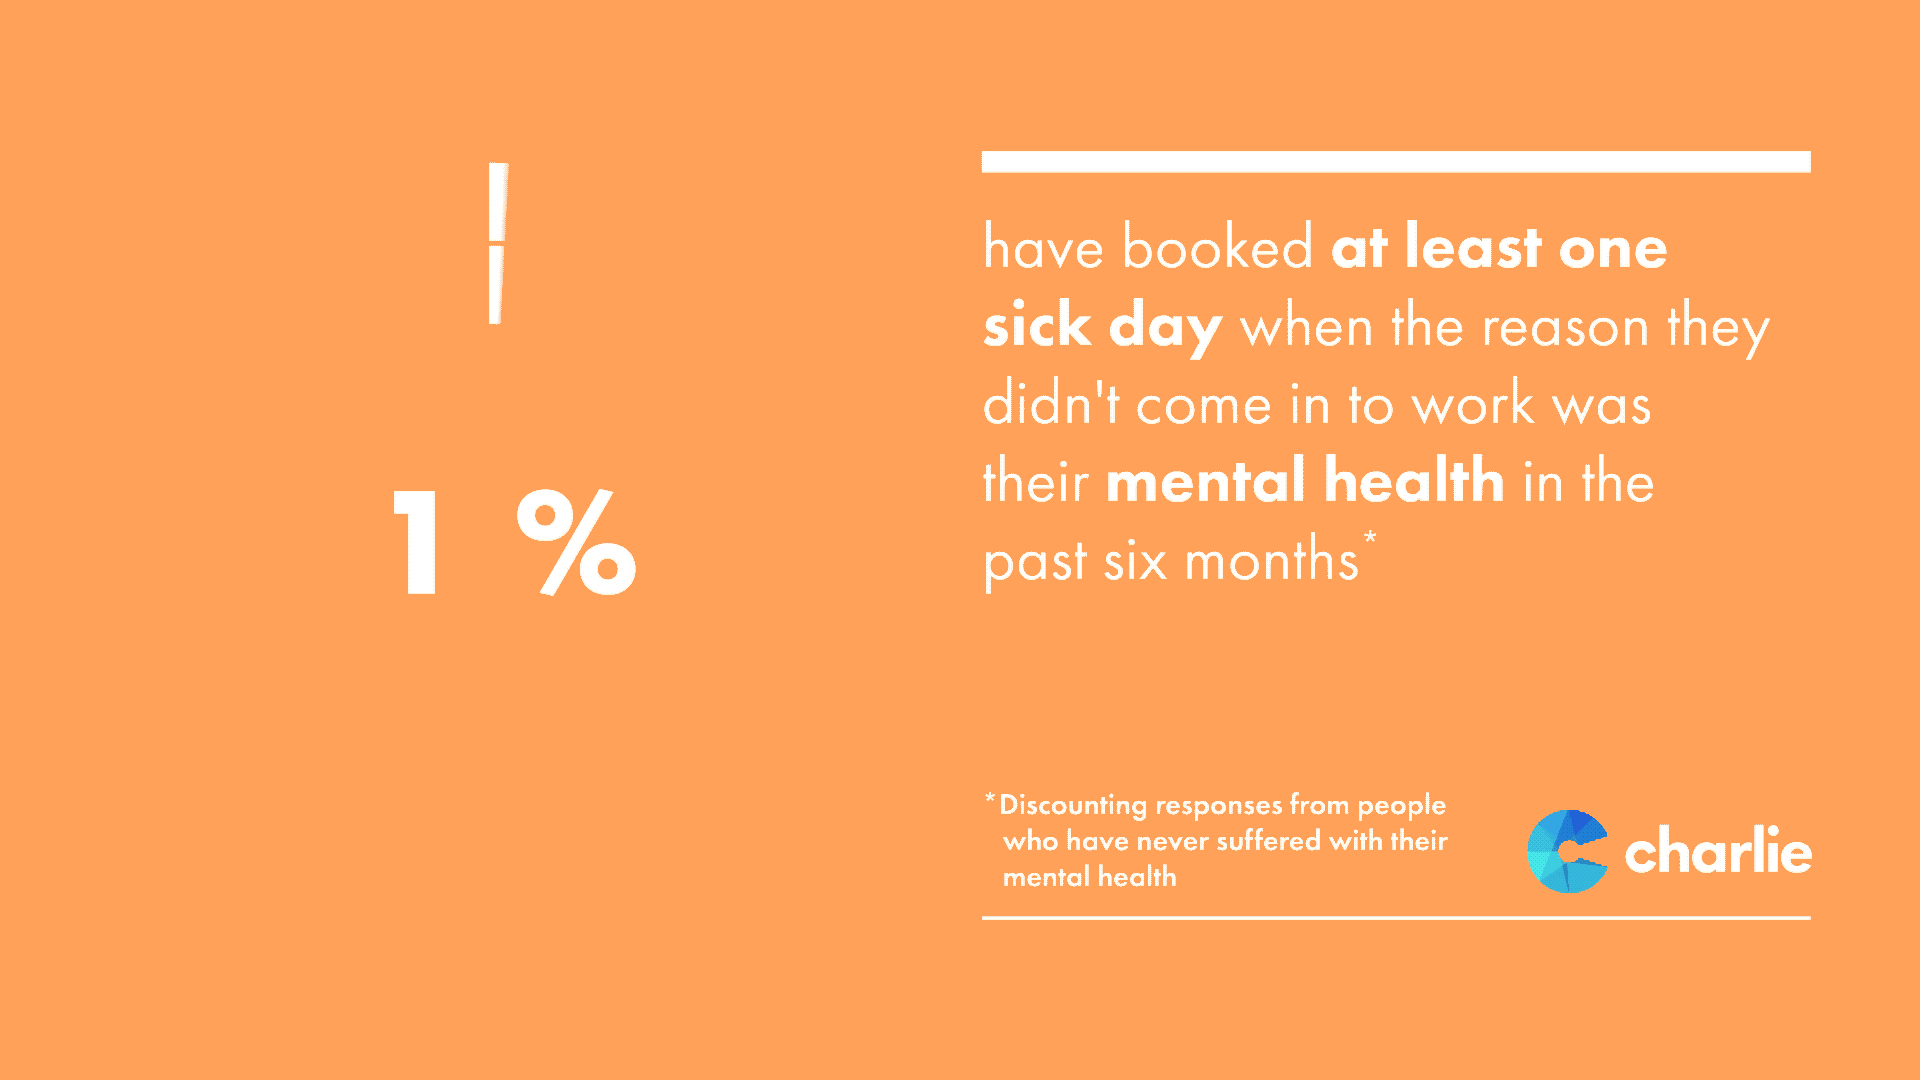 50% of our employees have booked at least one s ick day when the reason was for mental health reasons